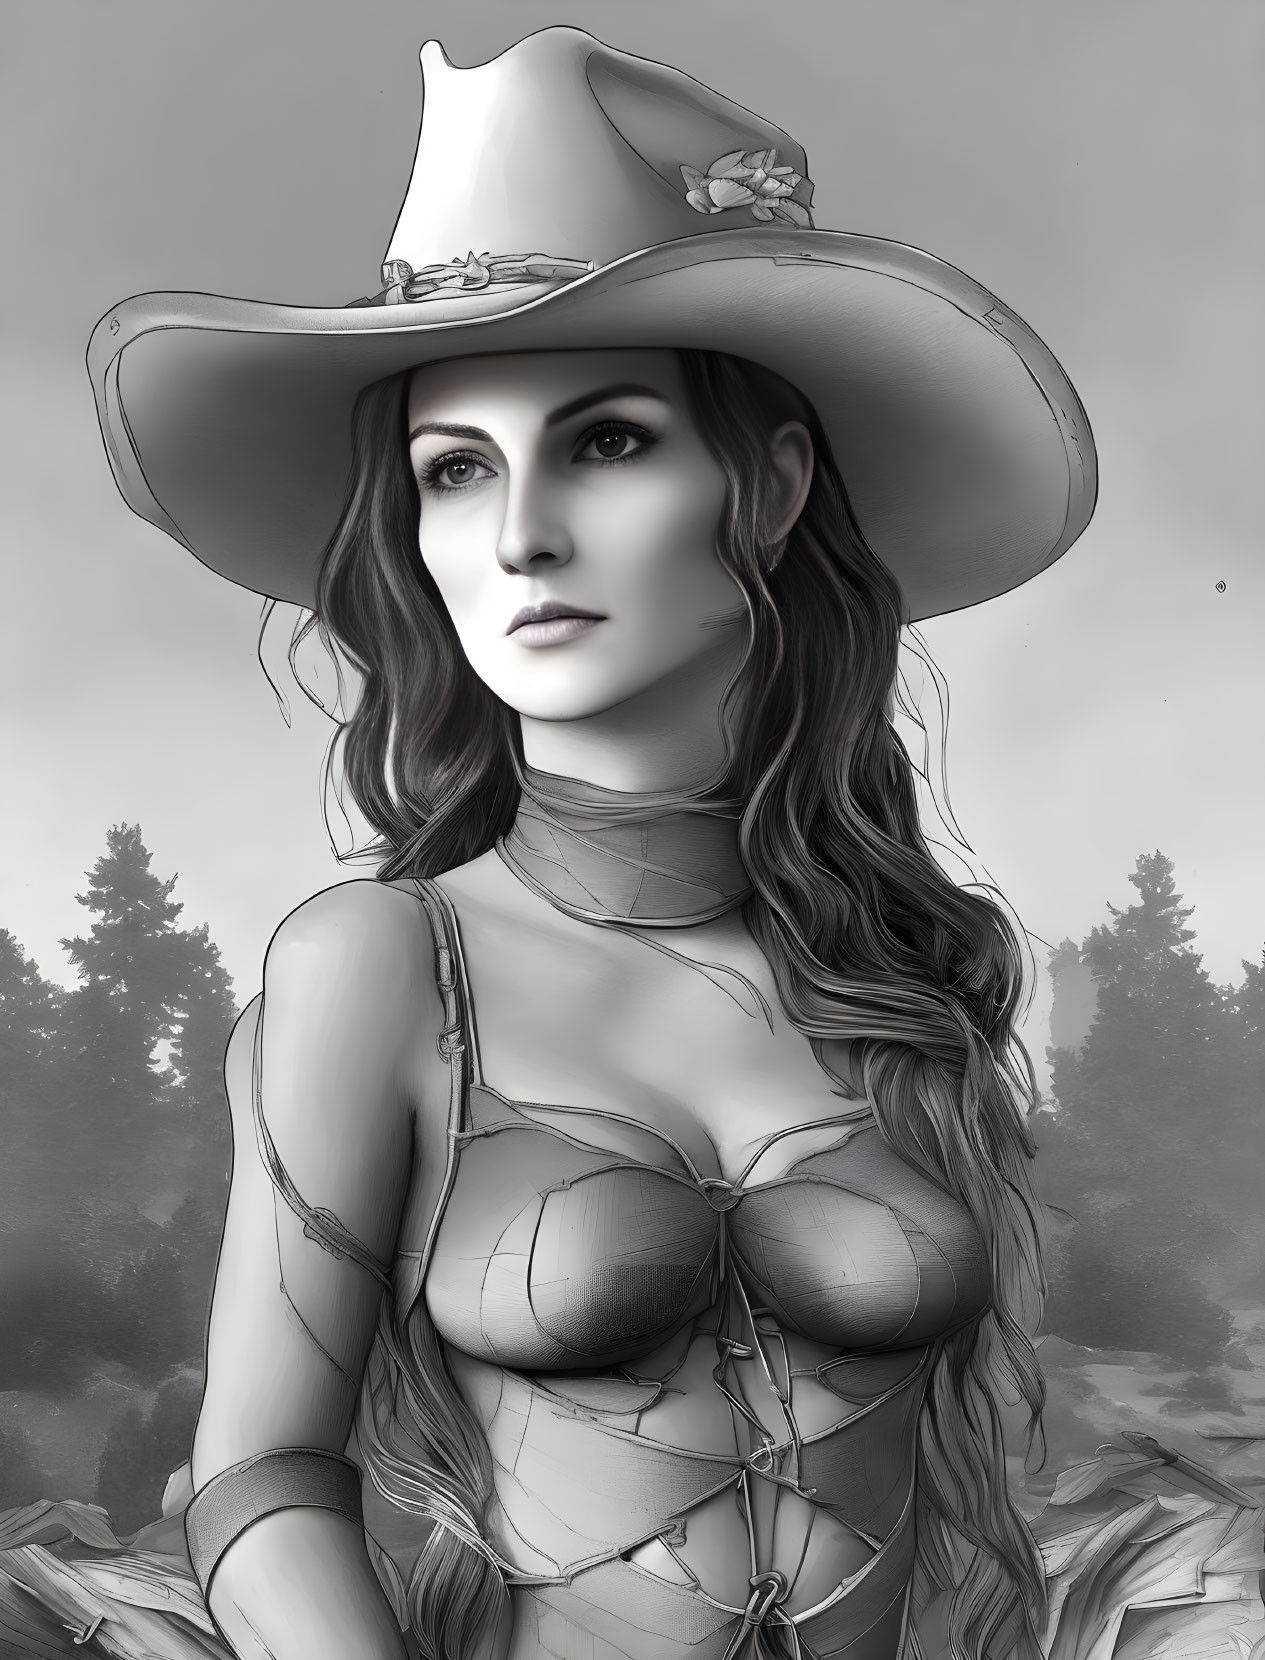 Monochrome illustration of woman in wide-brimmed hat and detailed bodice against forest backdrop